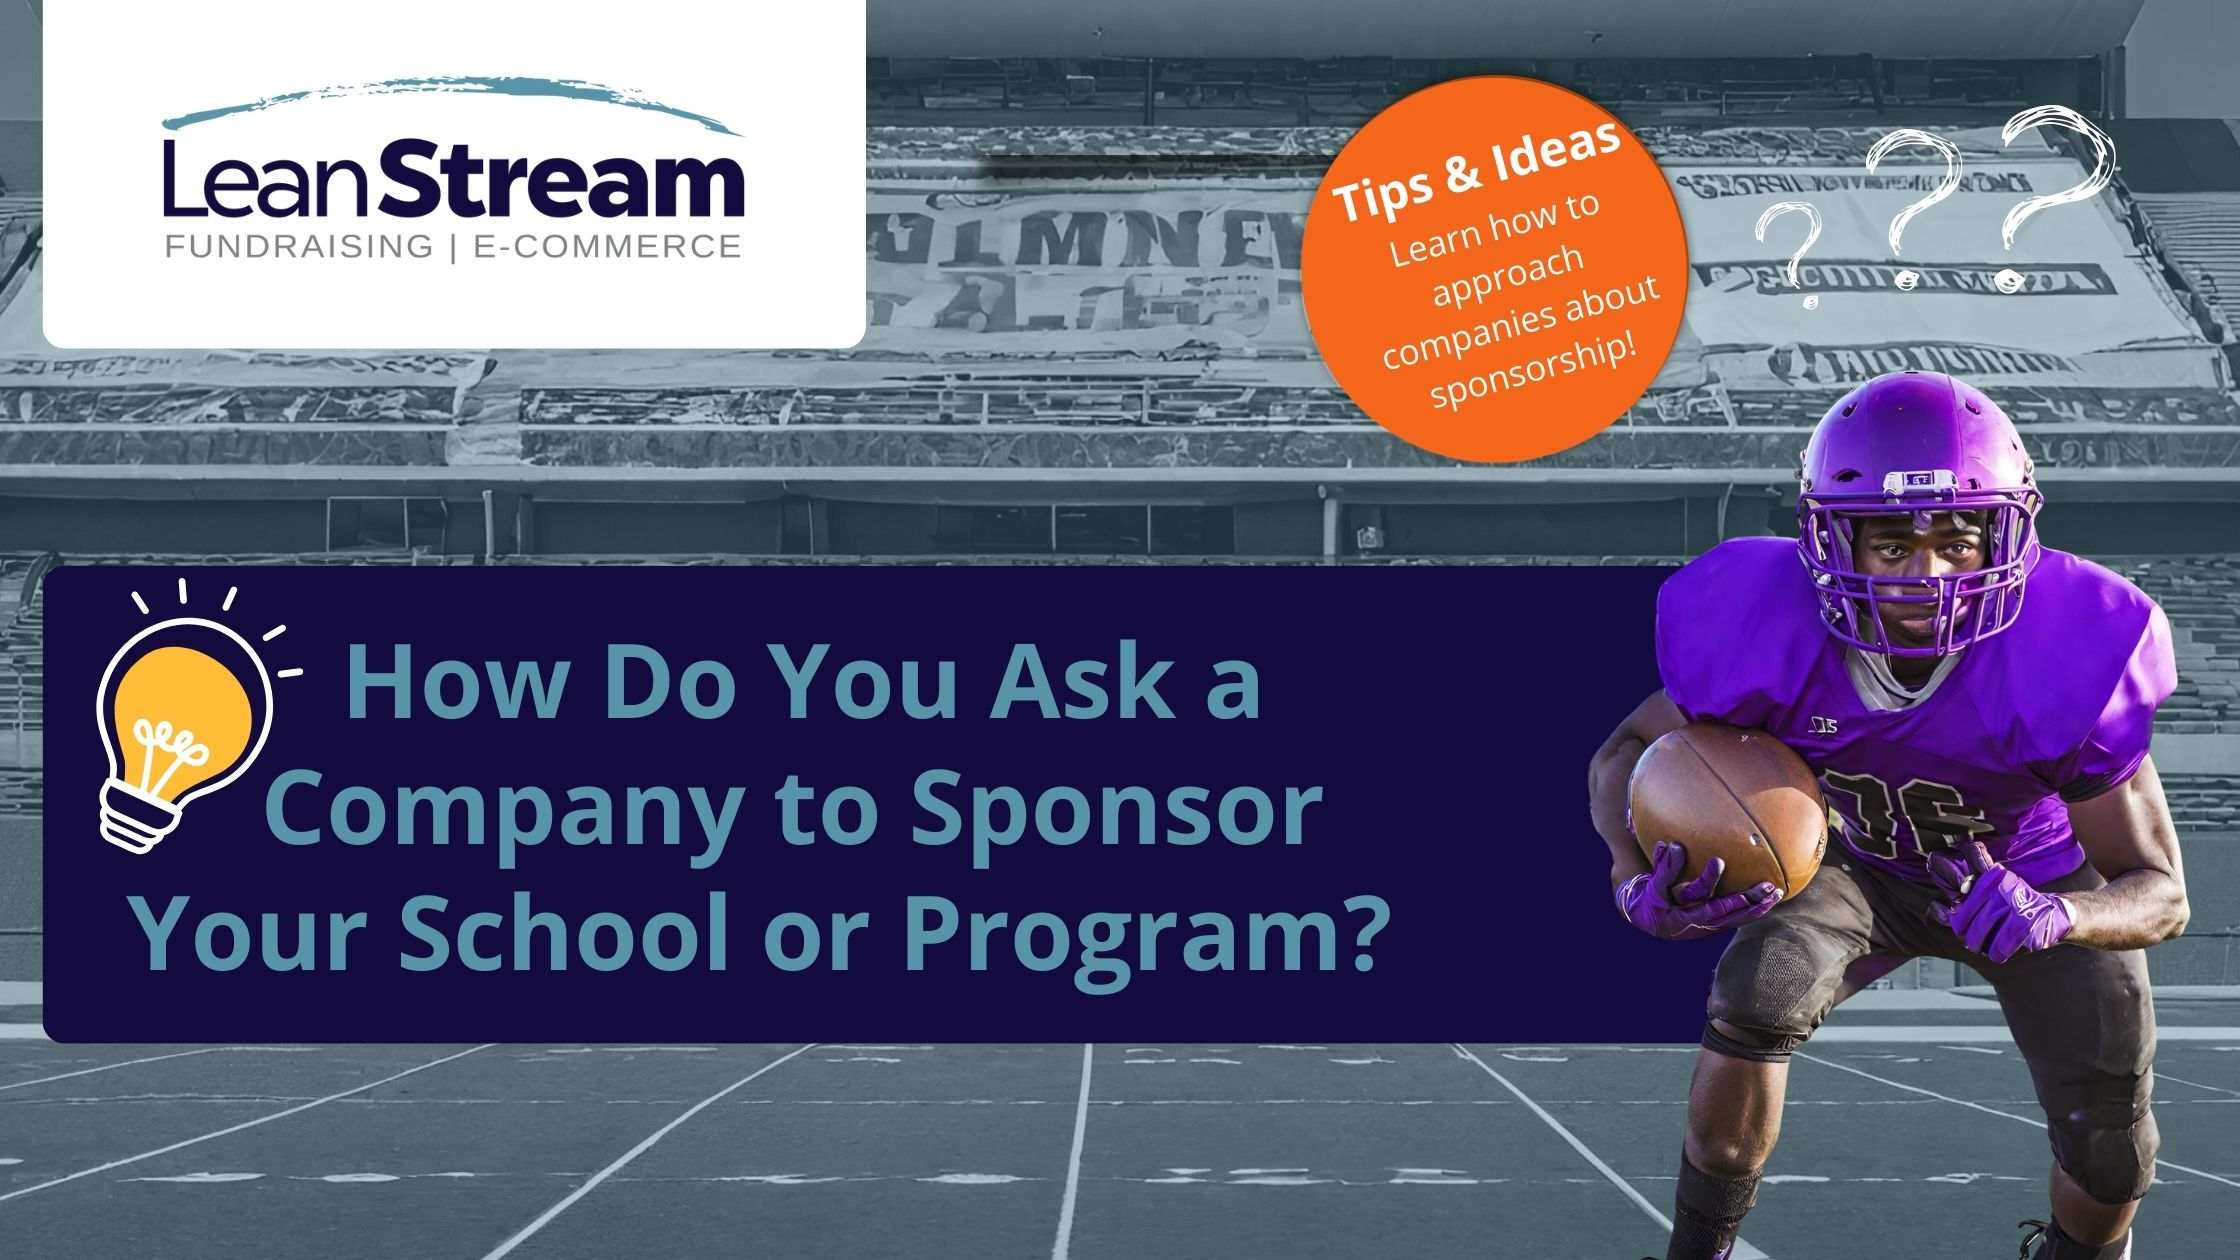 How Do You Ask a Company to Sponsor Your School or Program